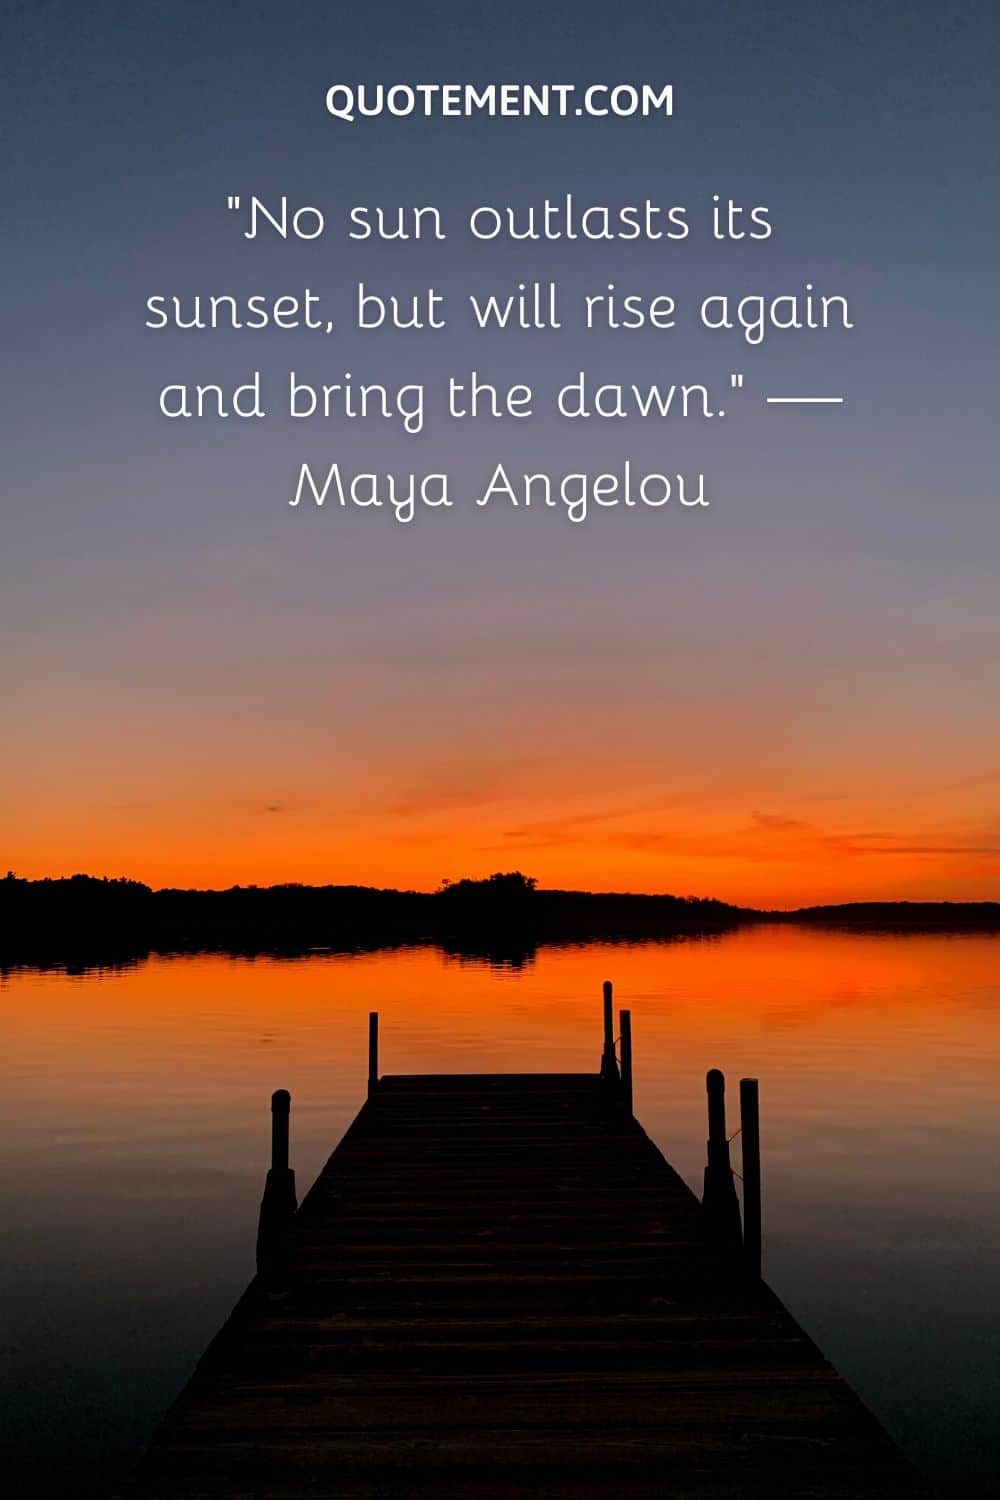 “No sun outlasts its sunset, but will rise again and bring the dawn.” — Maya Angelou